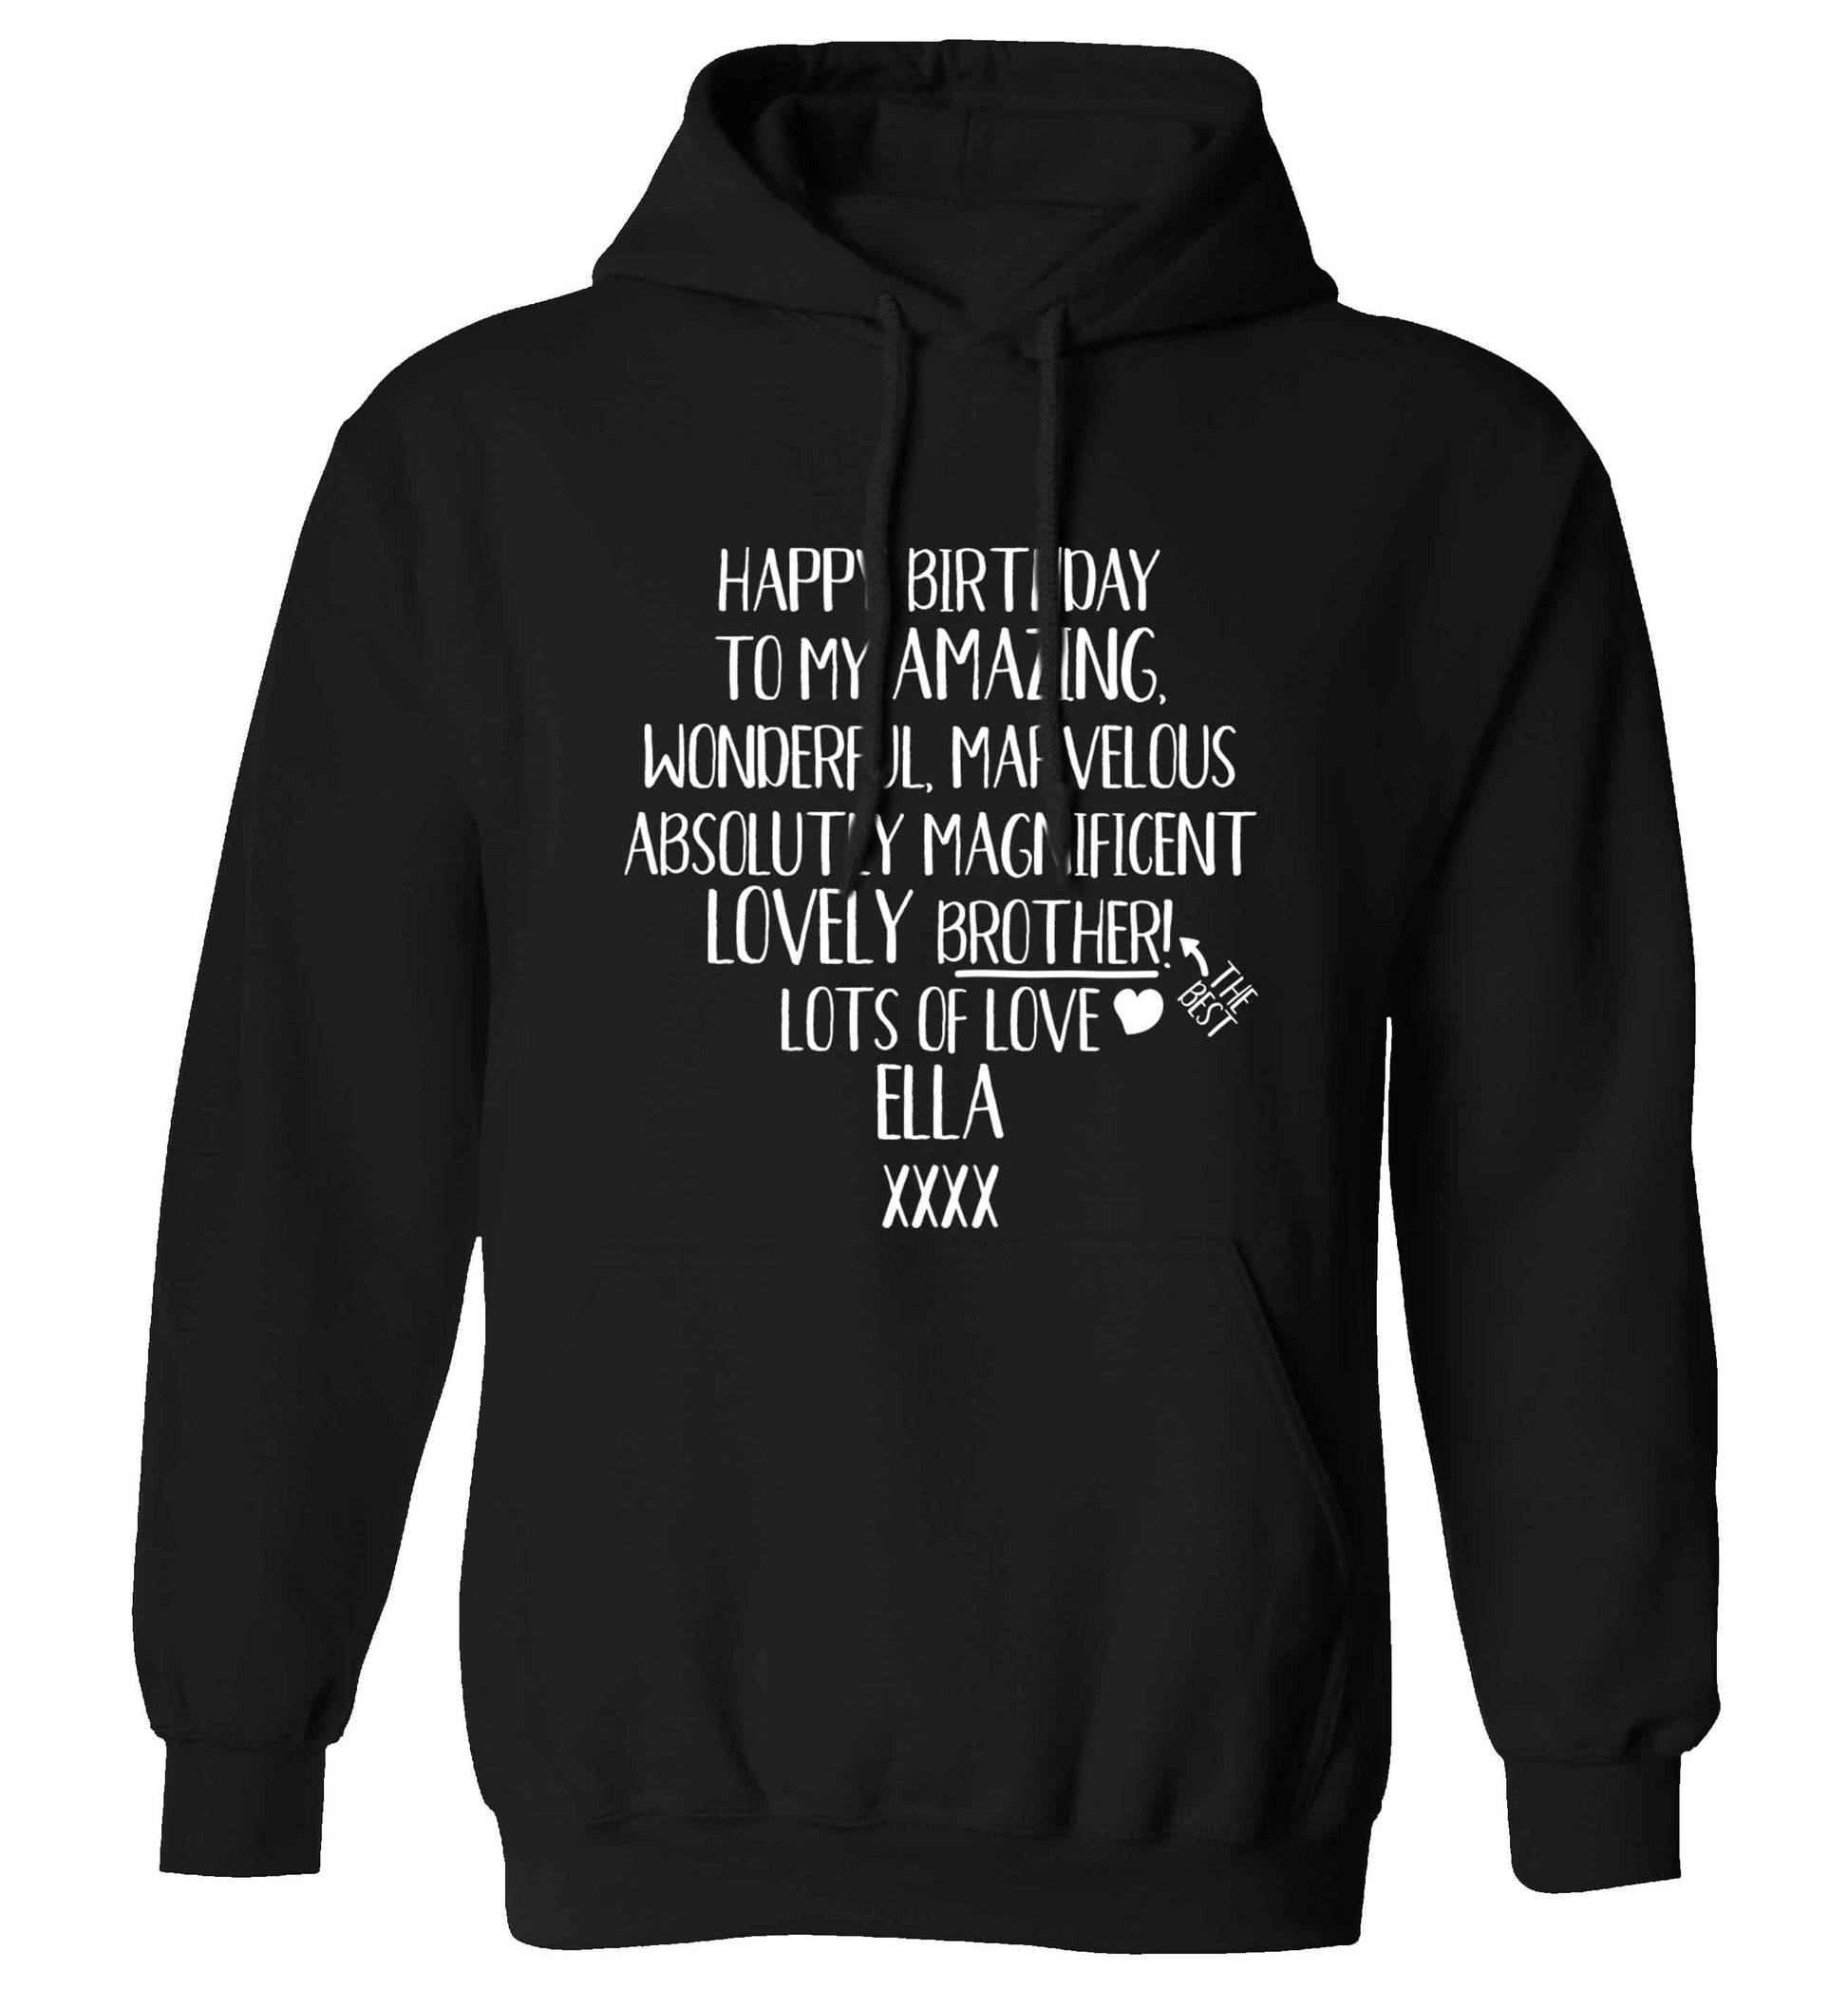 Personalised happy birthday to my amazing, wonderful, lovely brother adults unisex black hoodie 2XL